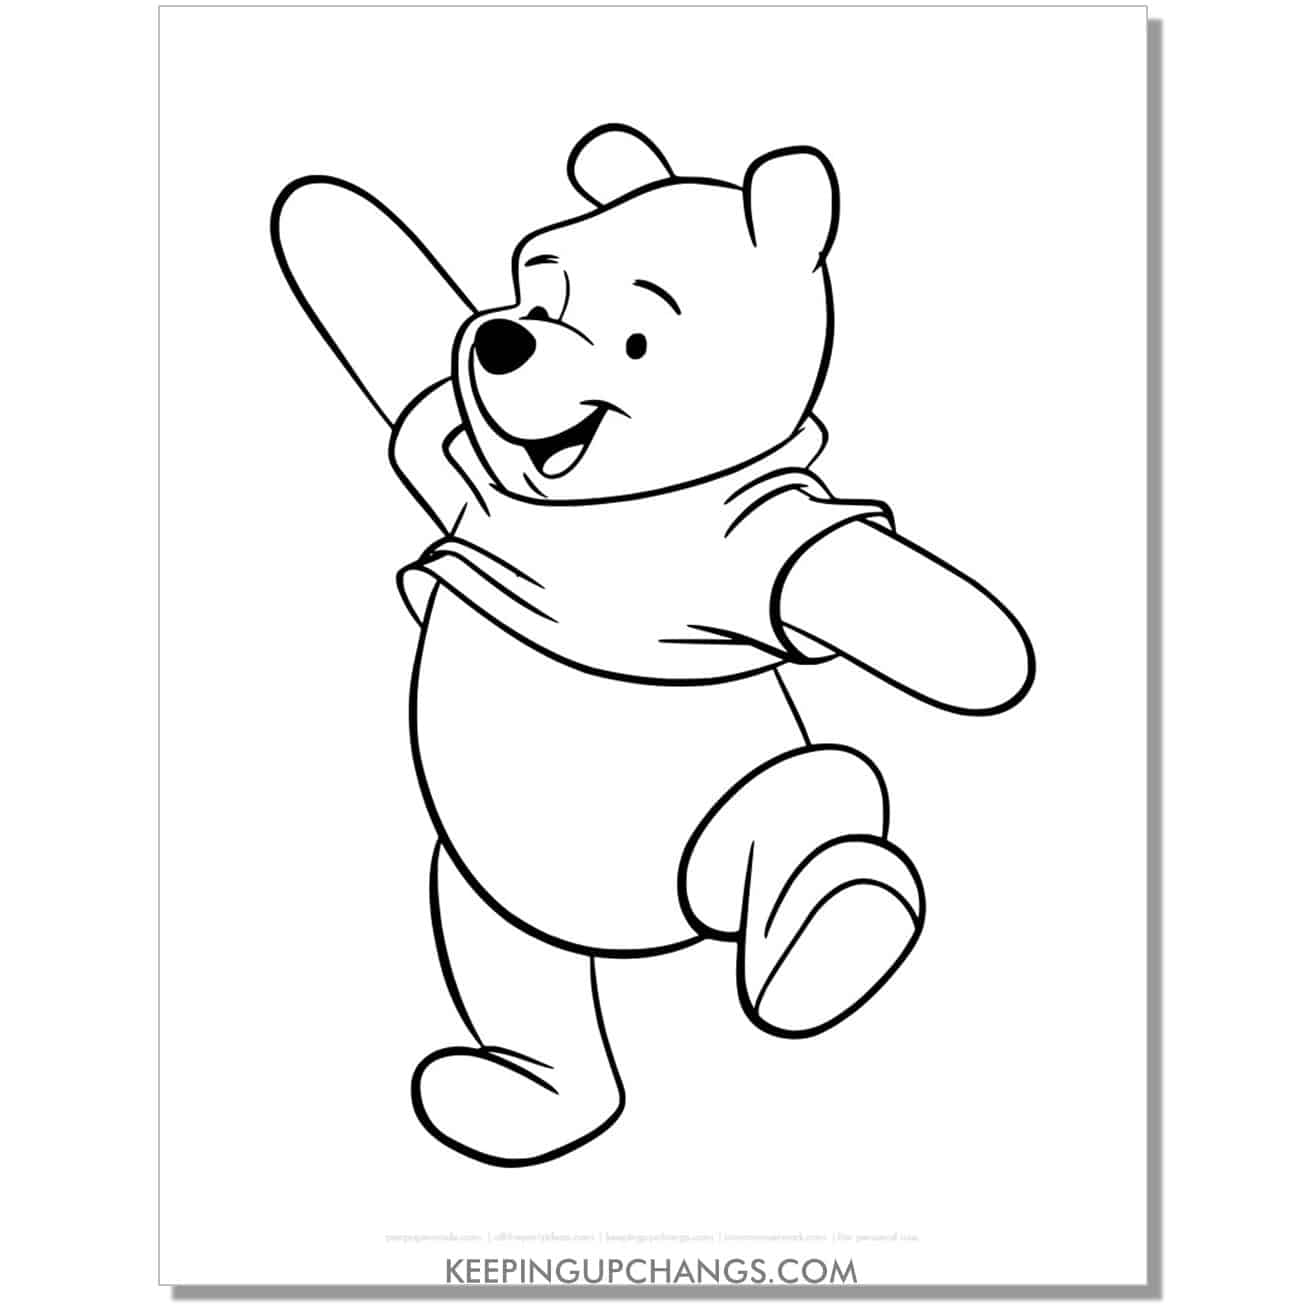 winnie the pooh arms spread coloring page, sheet.